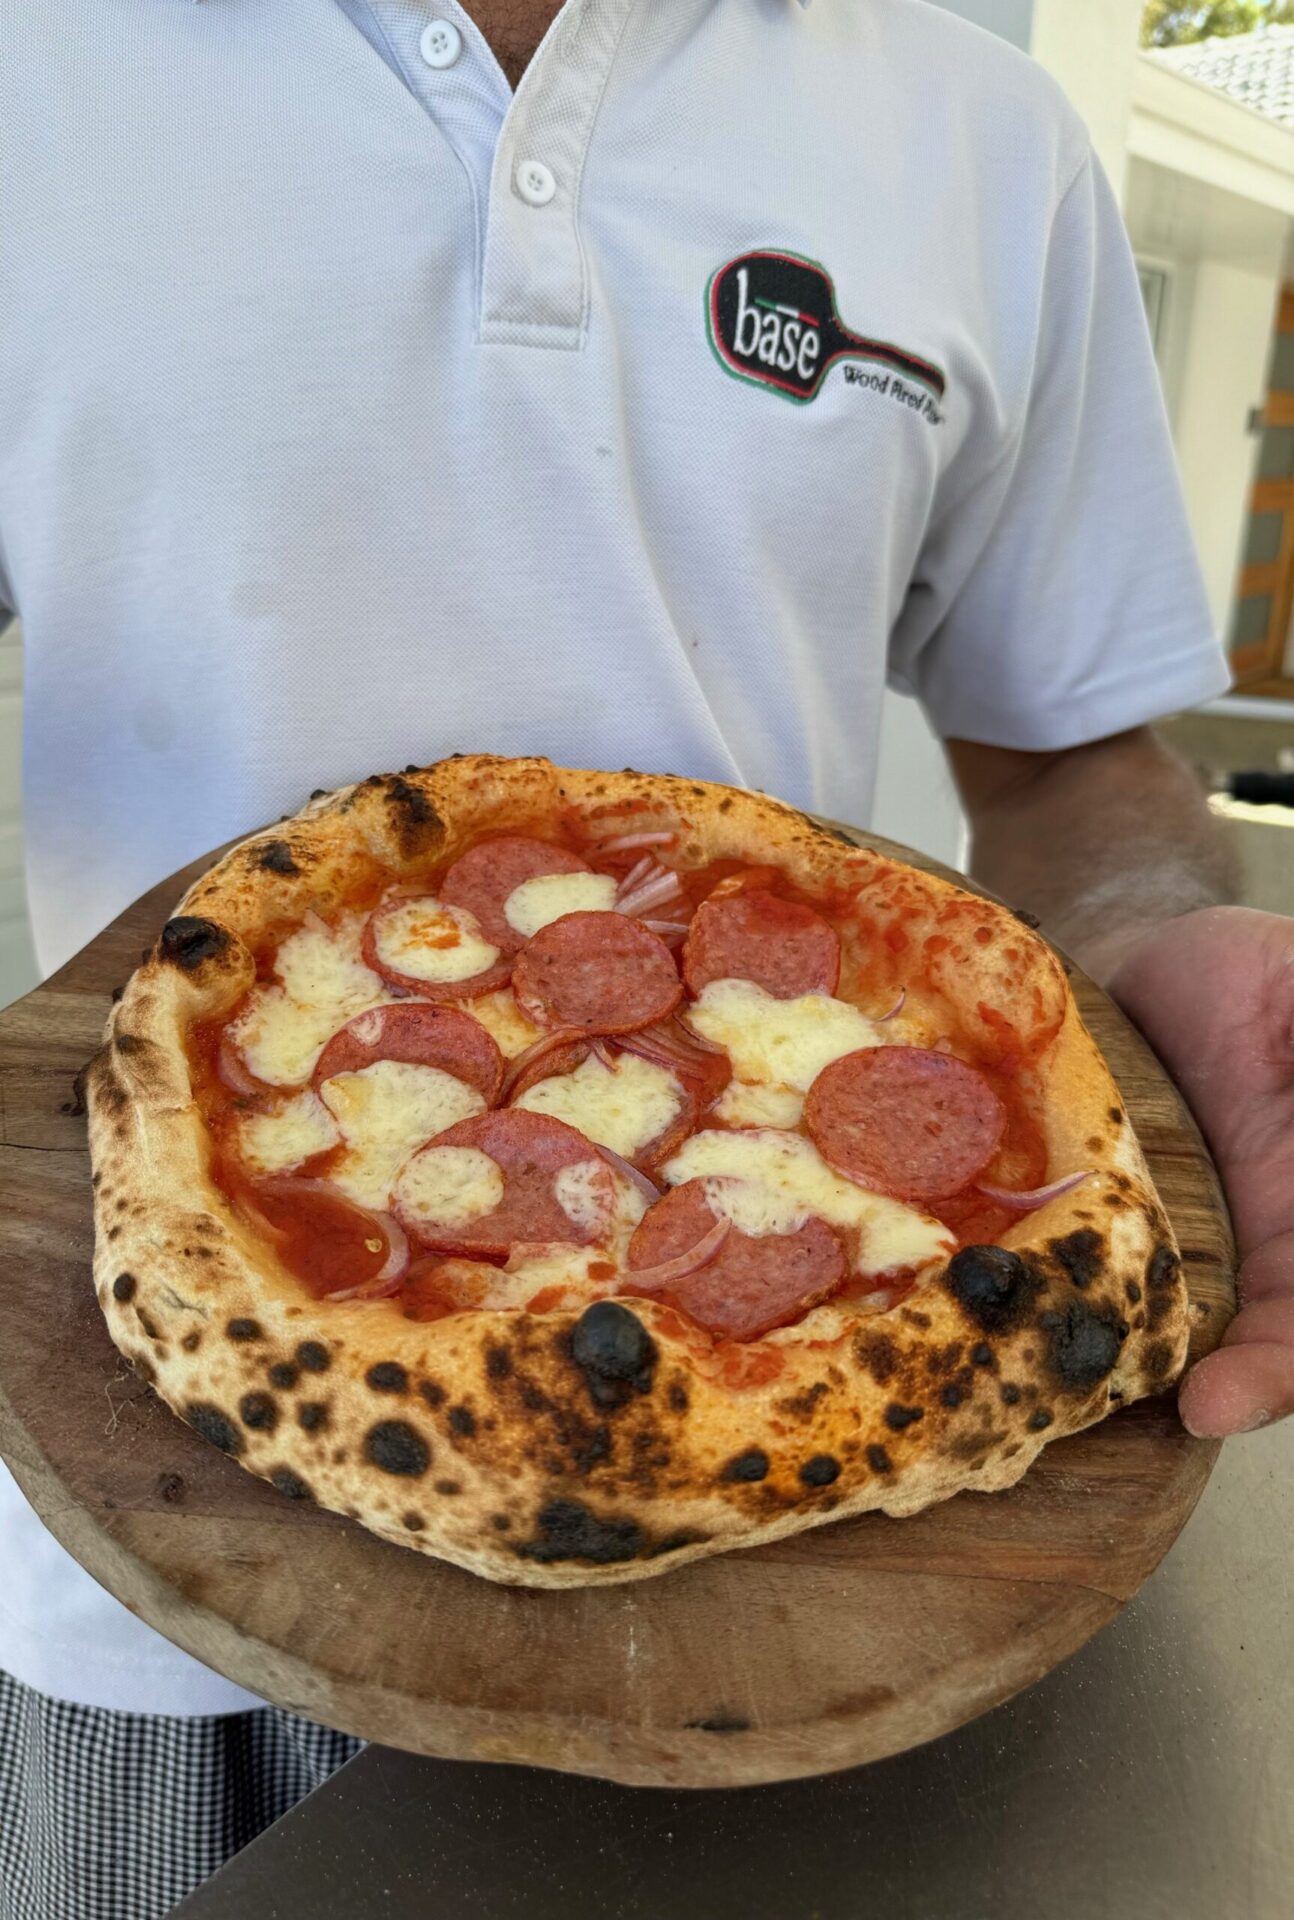 Owner Fabio with pizza